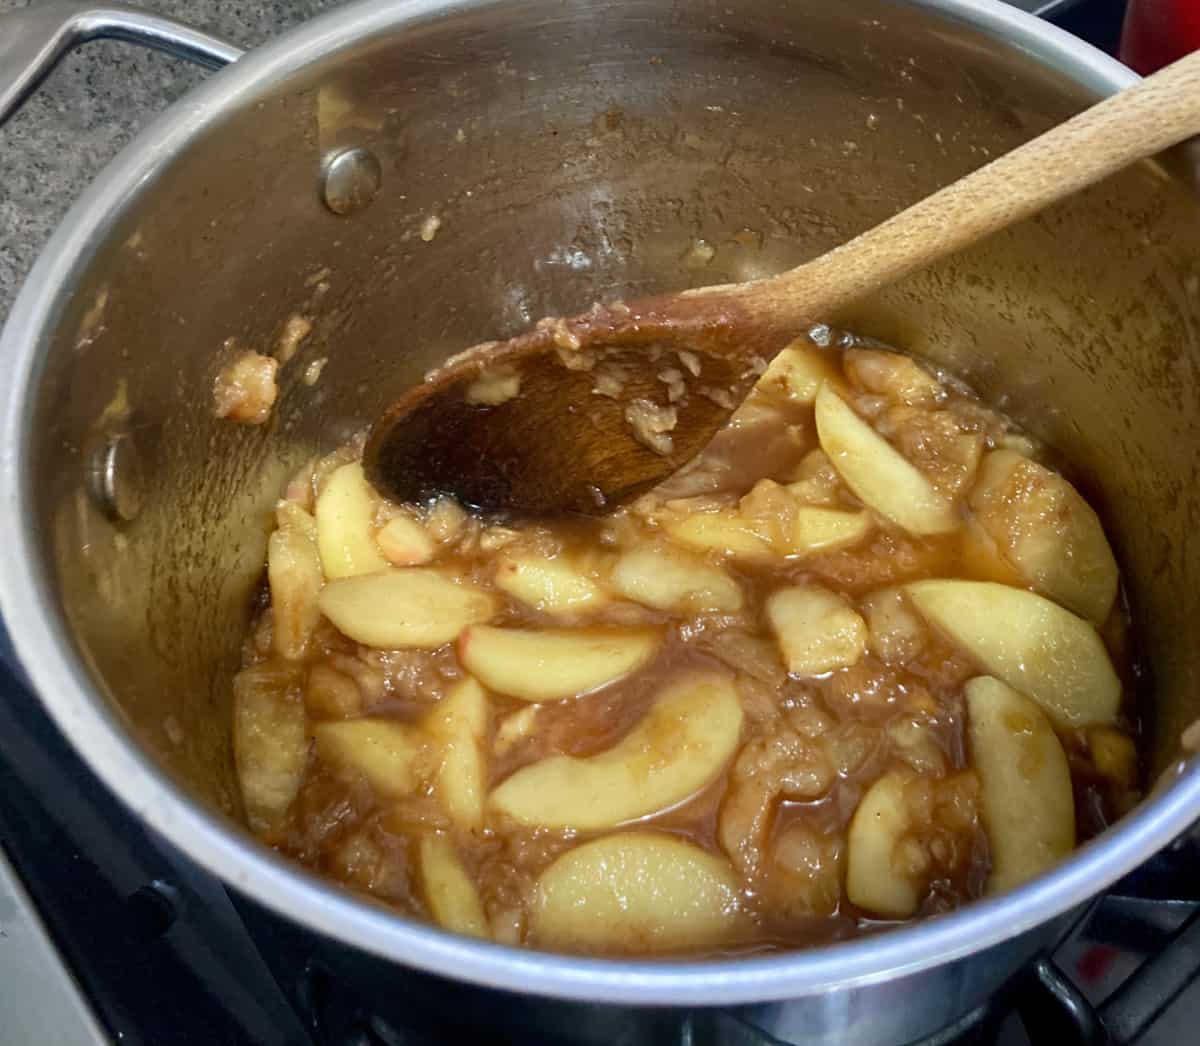 Cooking cinnamon apples with maple syrup and vanilla.